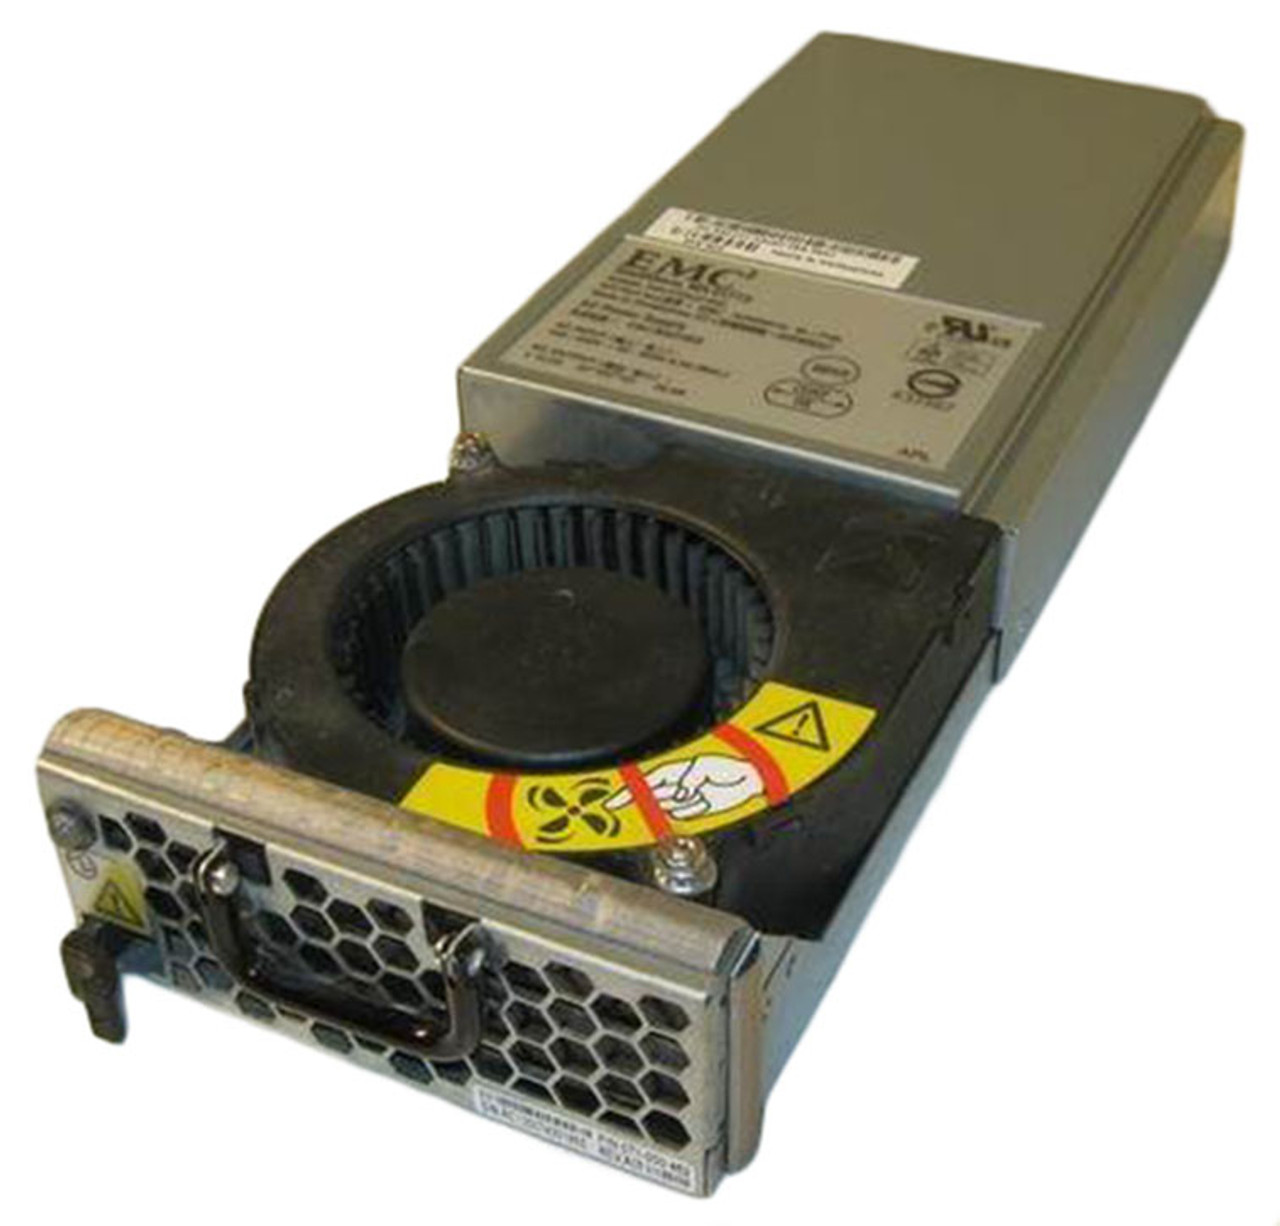 API4SG10 AcBel Polytech CX3 250-Watts AC Server Power Supply With 2 Fans